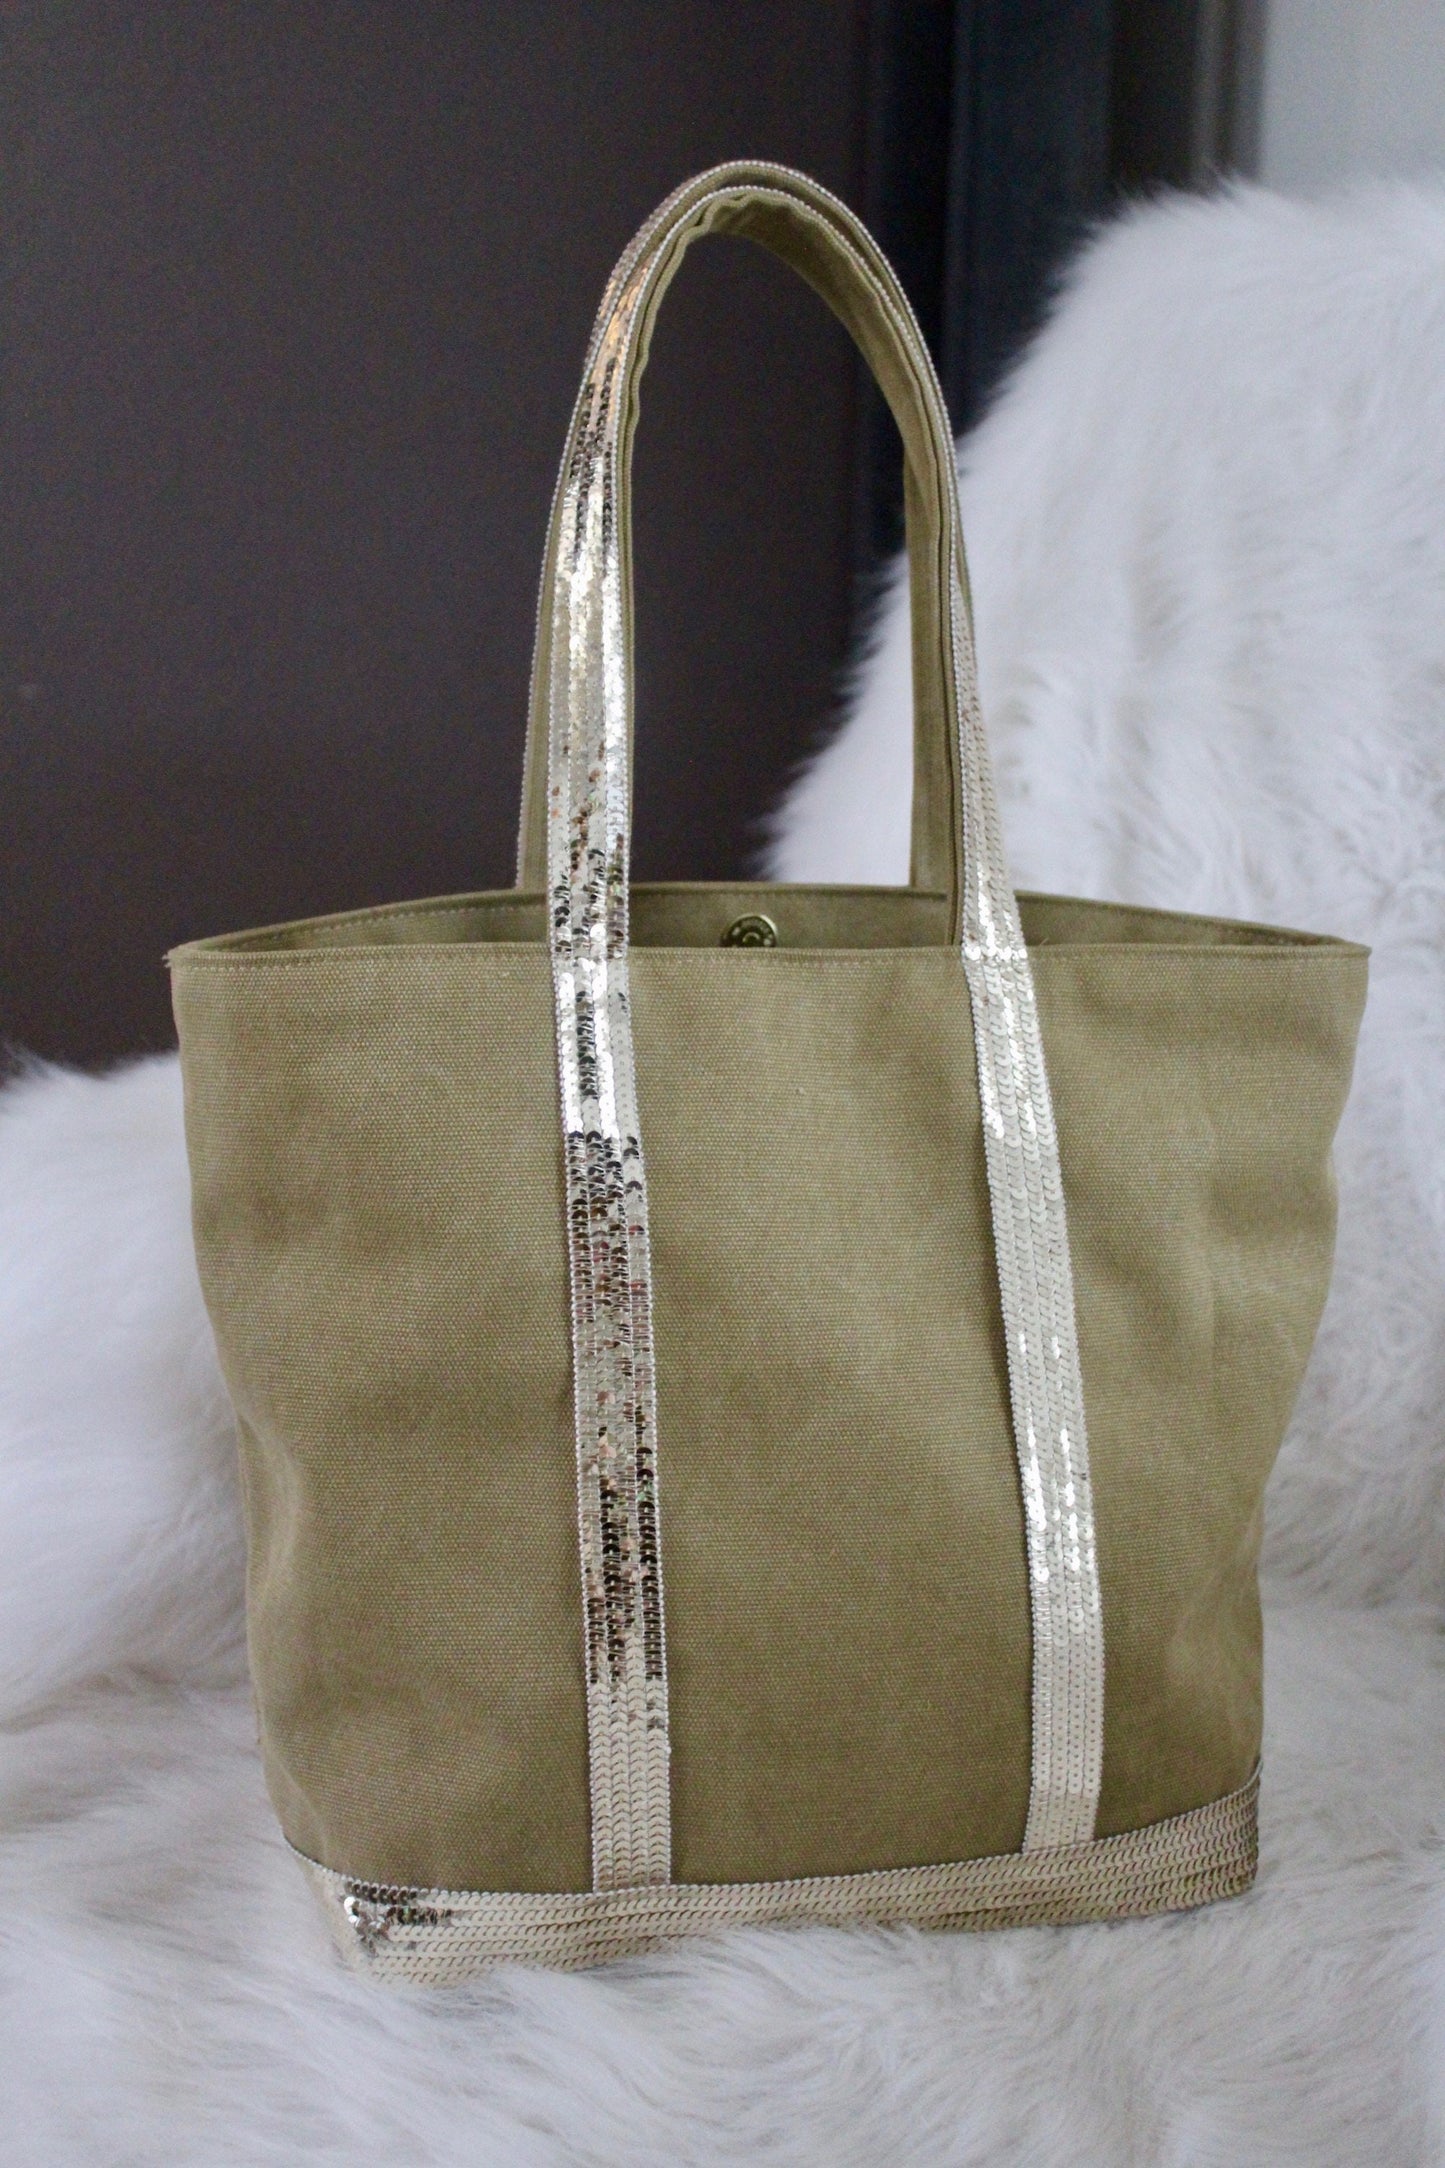 Khaki cotton tote bag with gold sequins